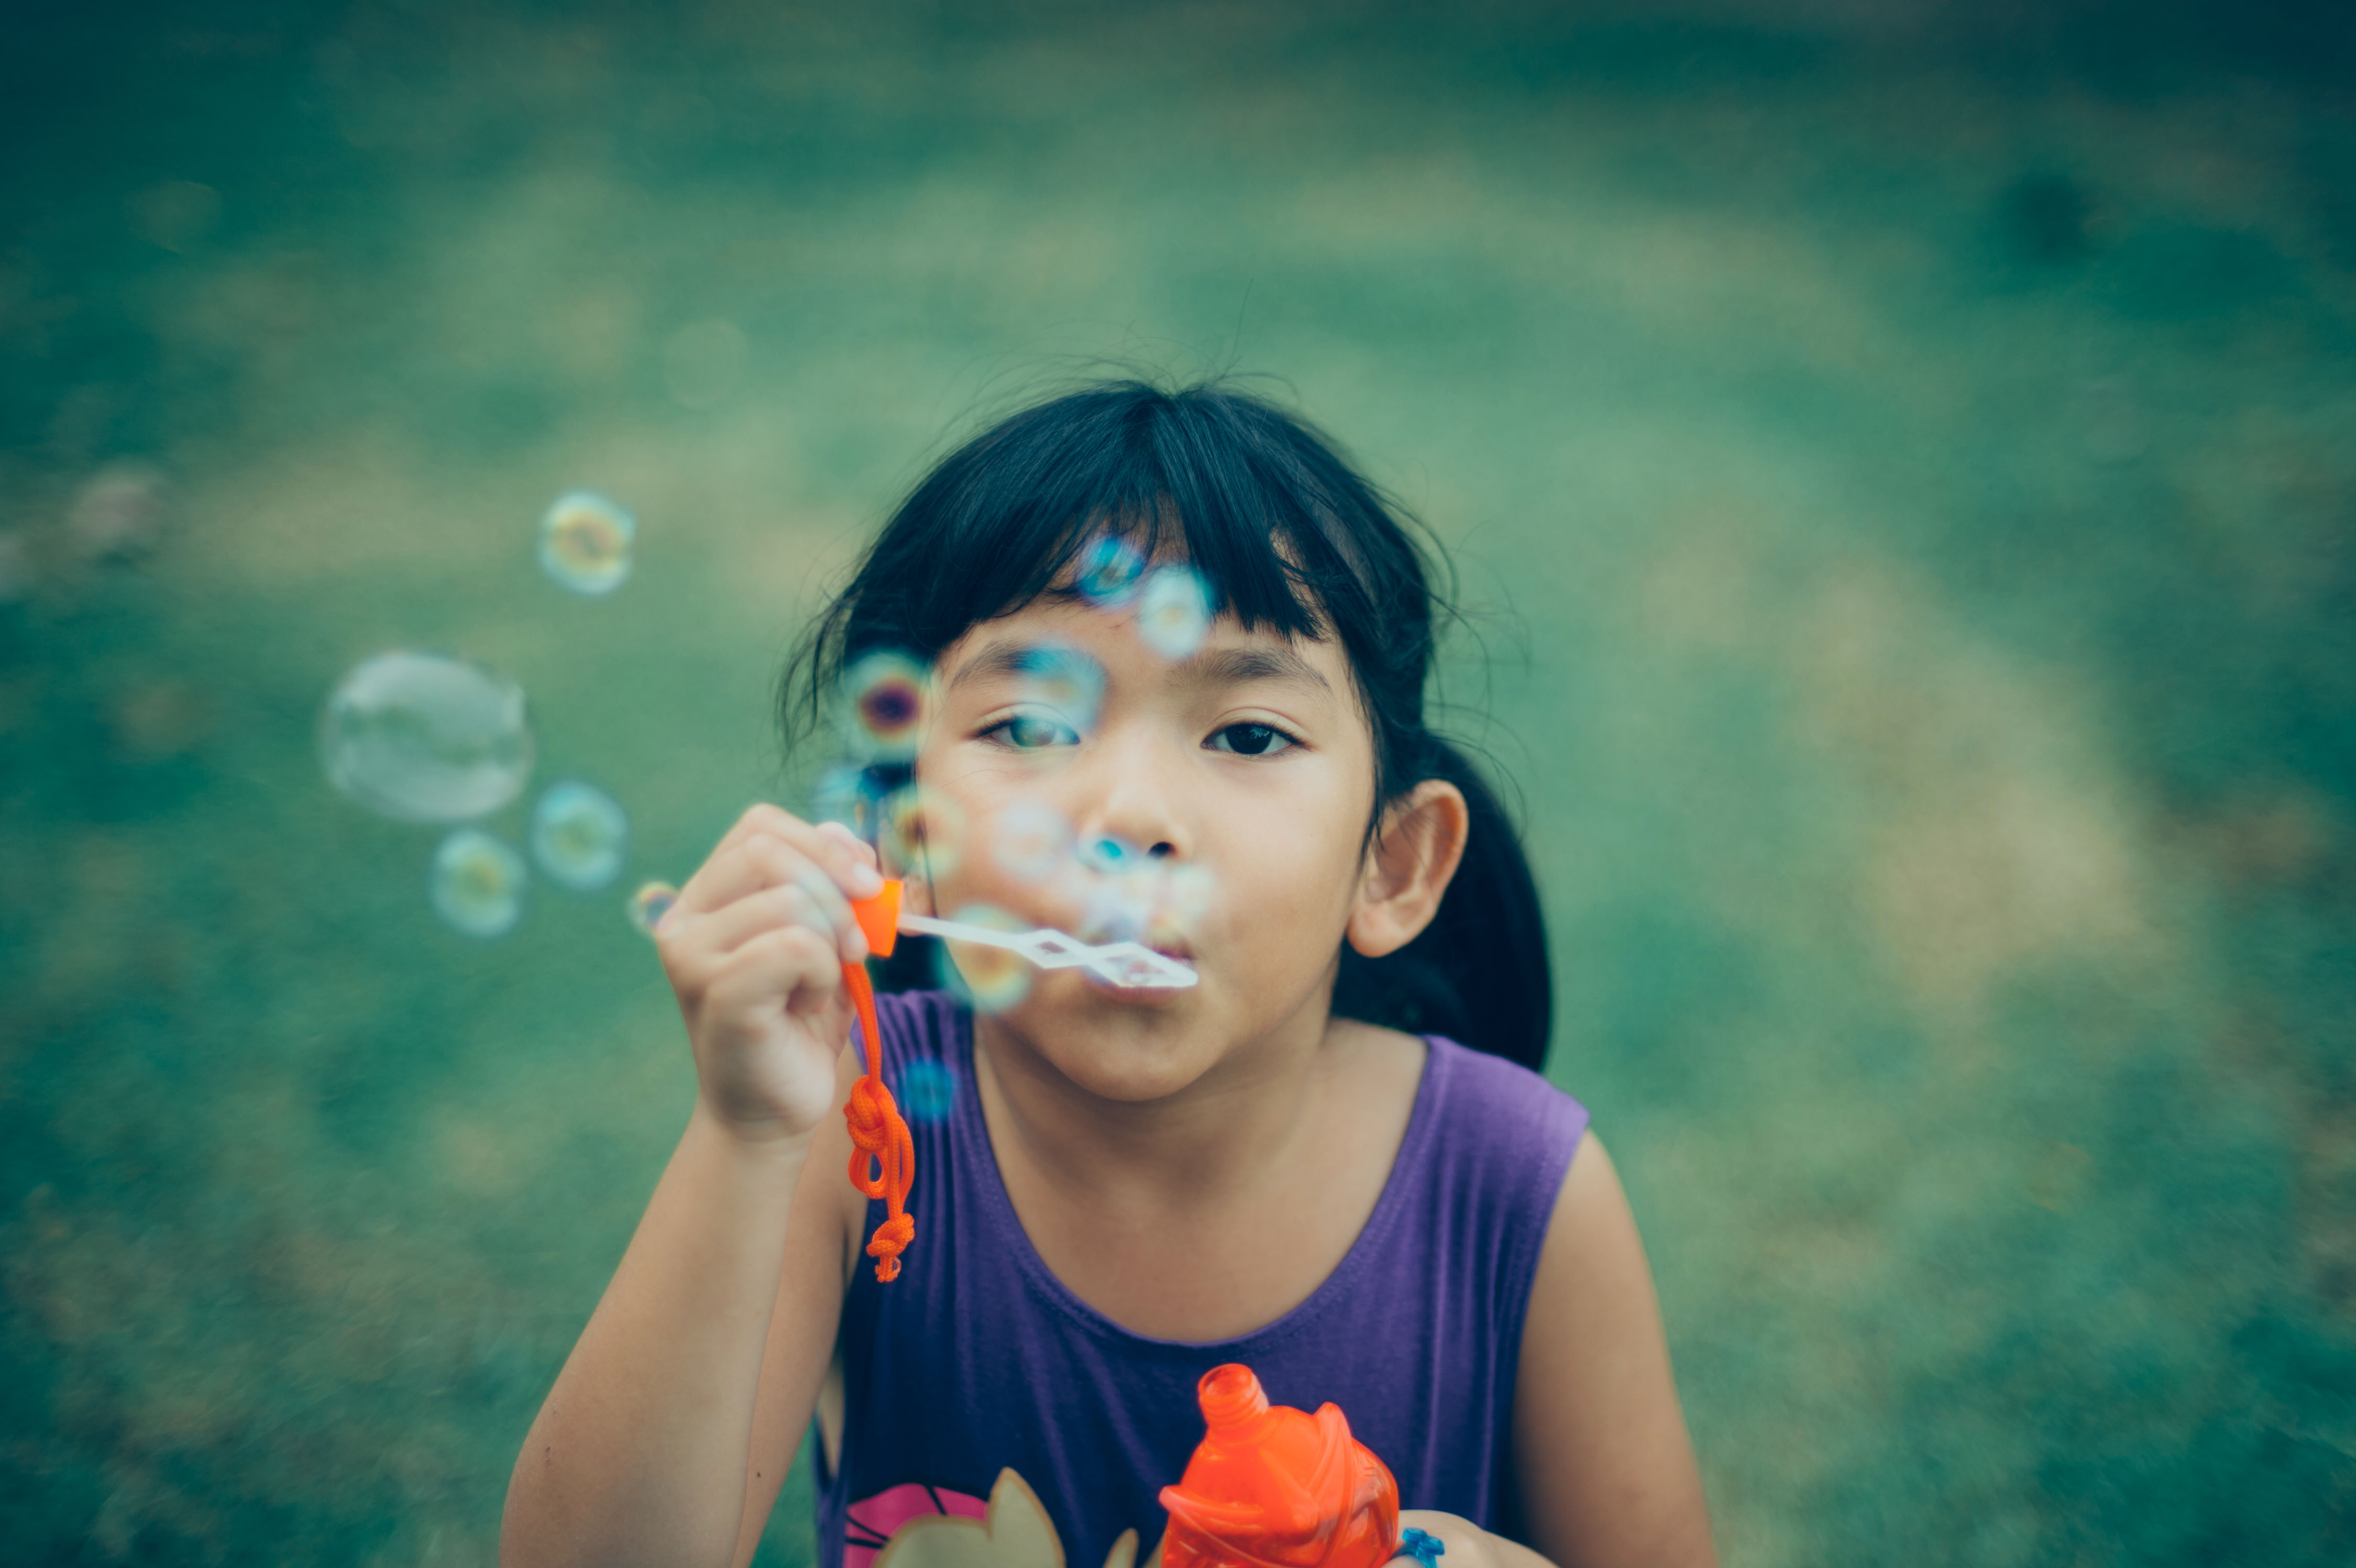 Asian little girl happy with bubbles image - Free stock photo ...